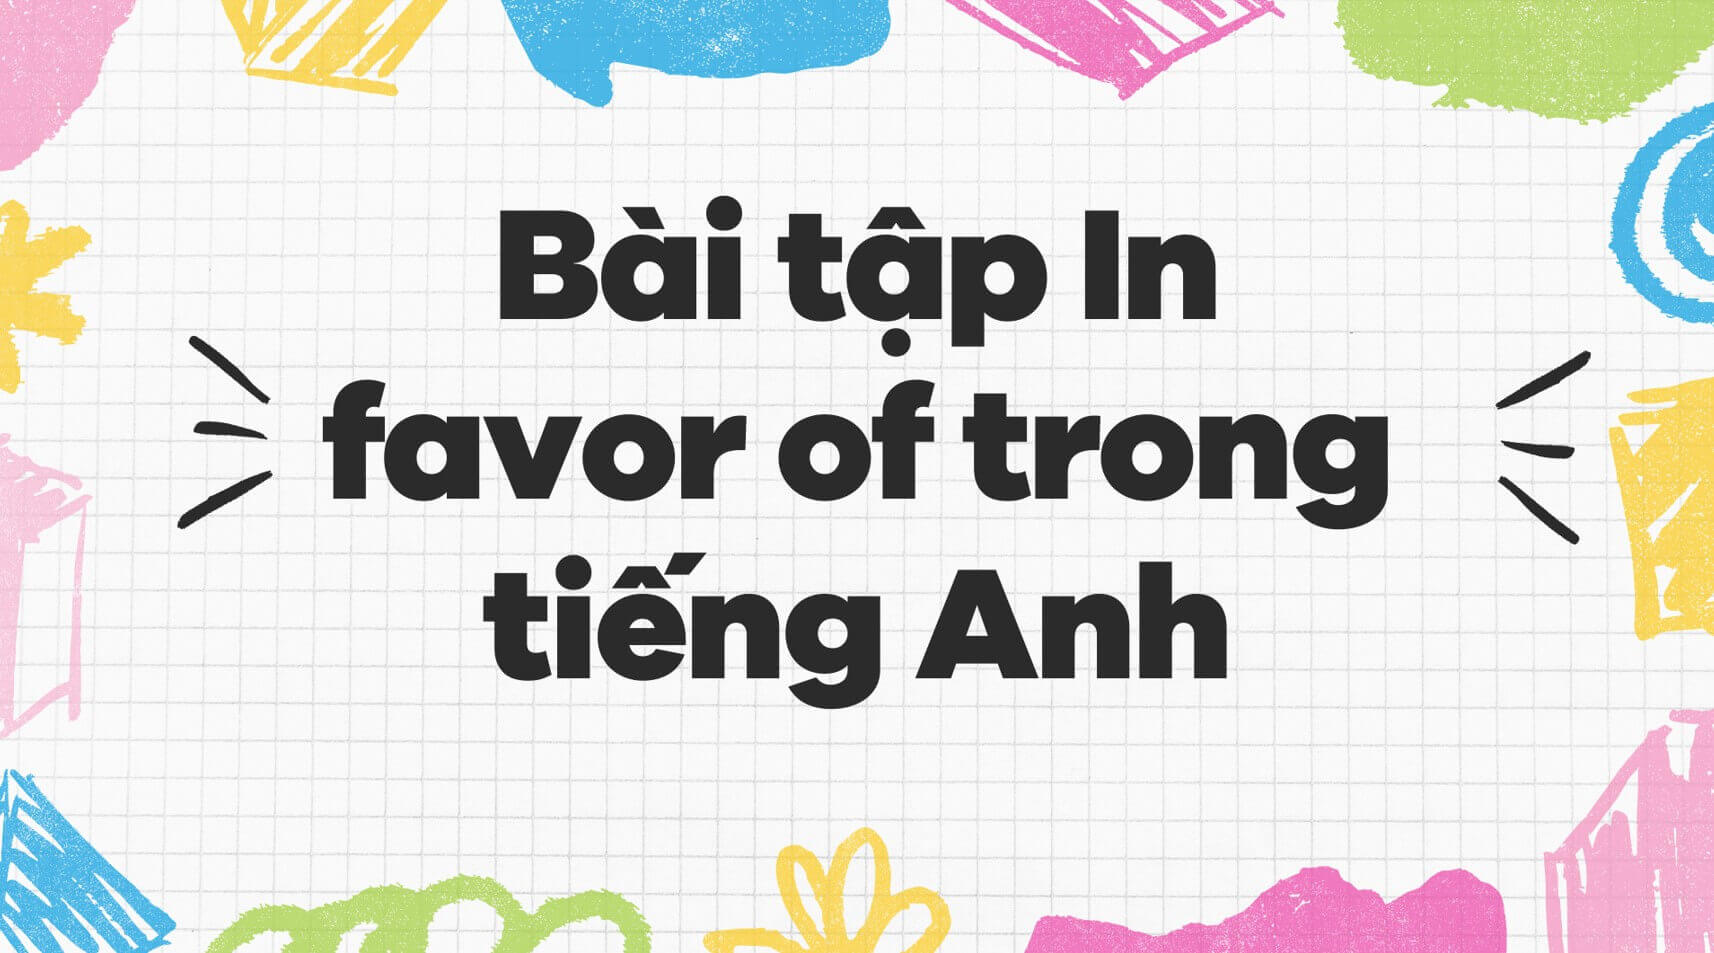 Bài tập In favor of trong tiếng Anh